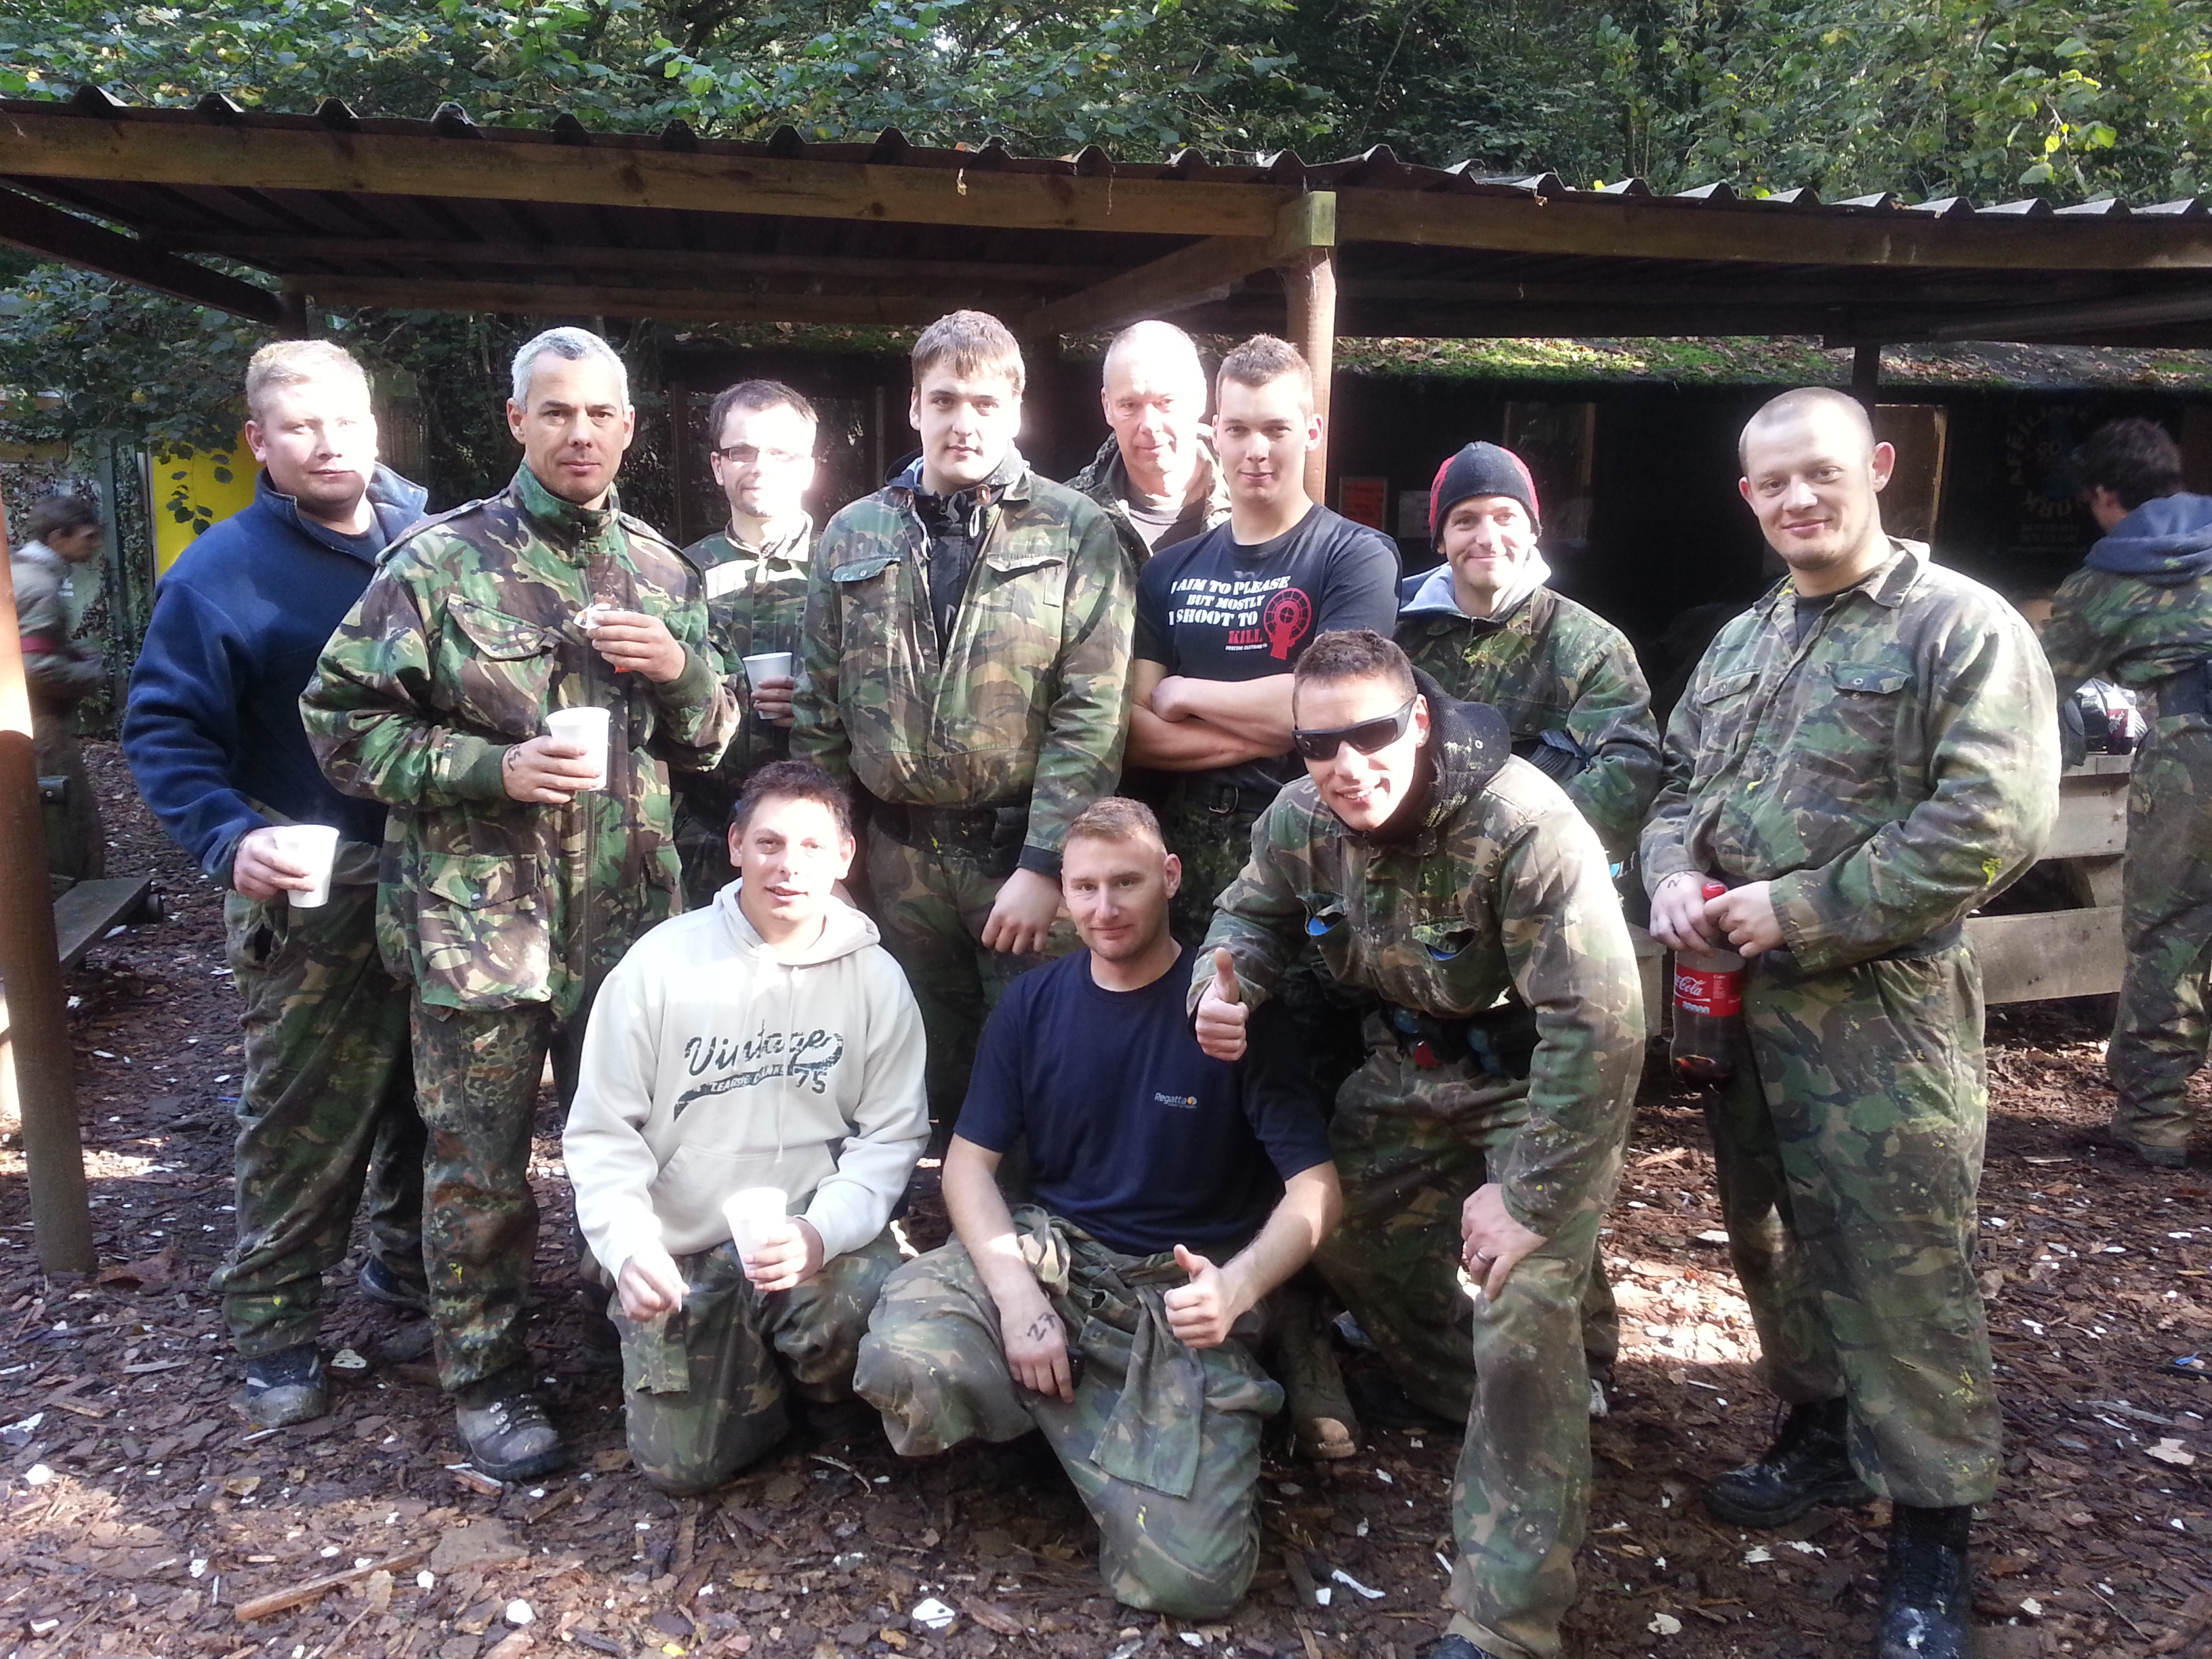 Paintballing To Raise Money For Charity